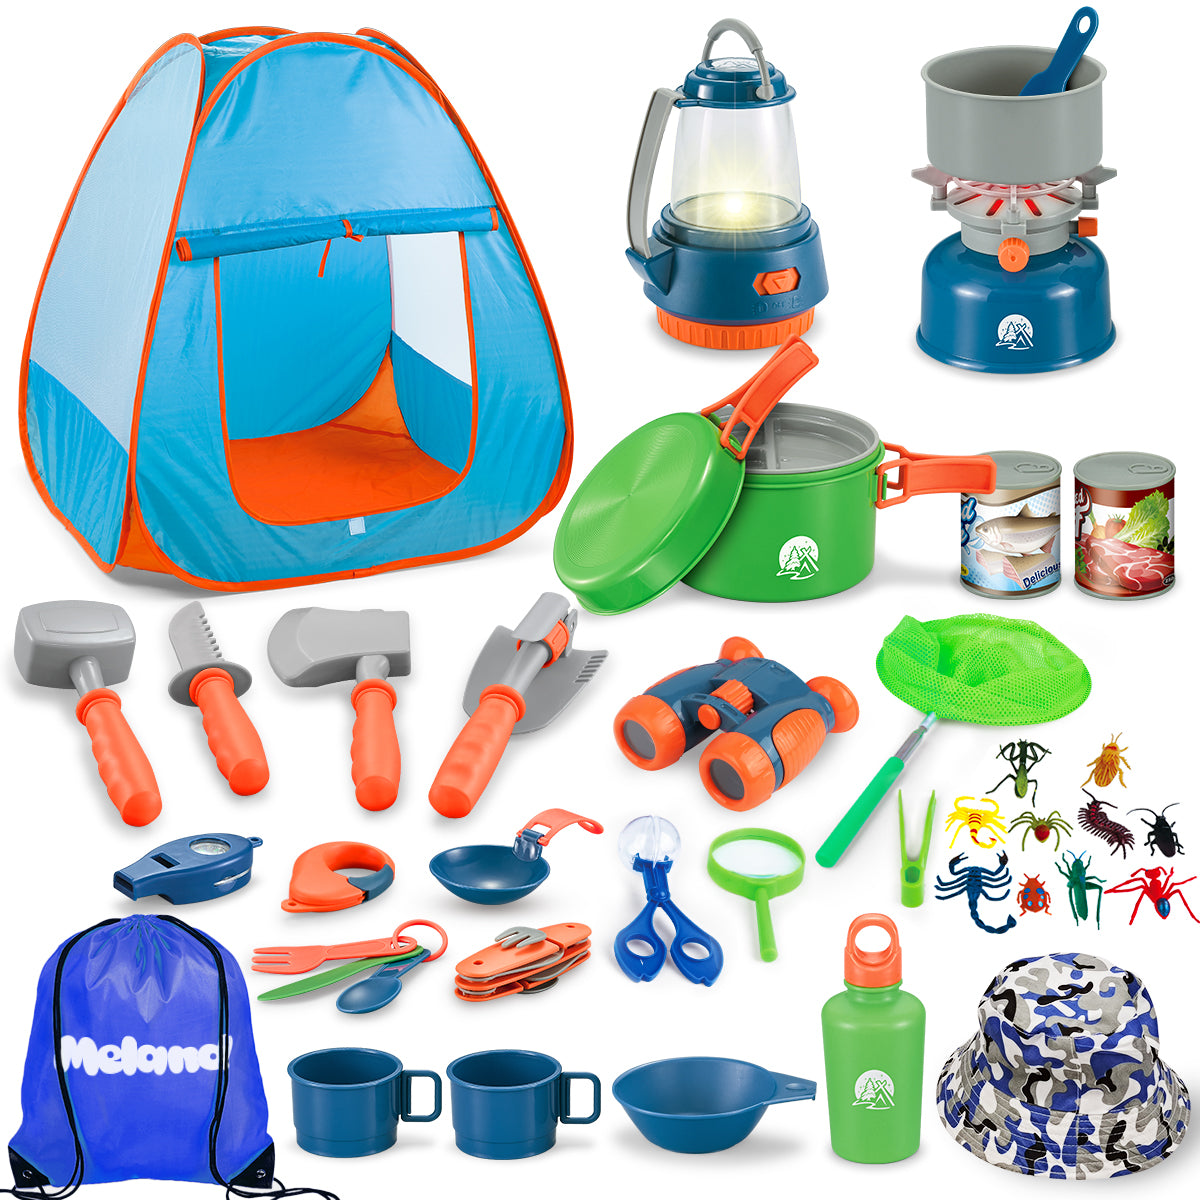 Kids Camping Gear Toy Set with Tent for Outdoor Pretend Play